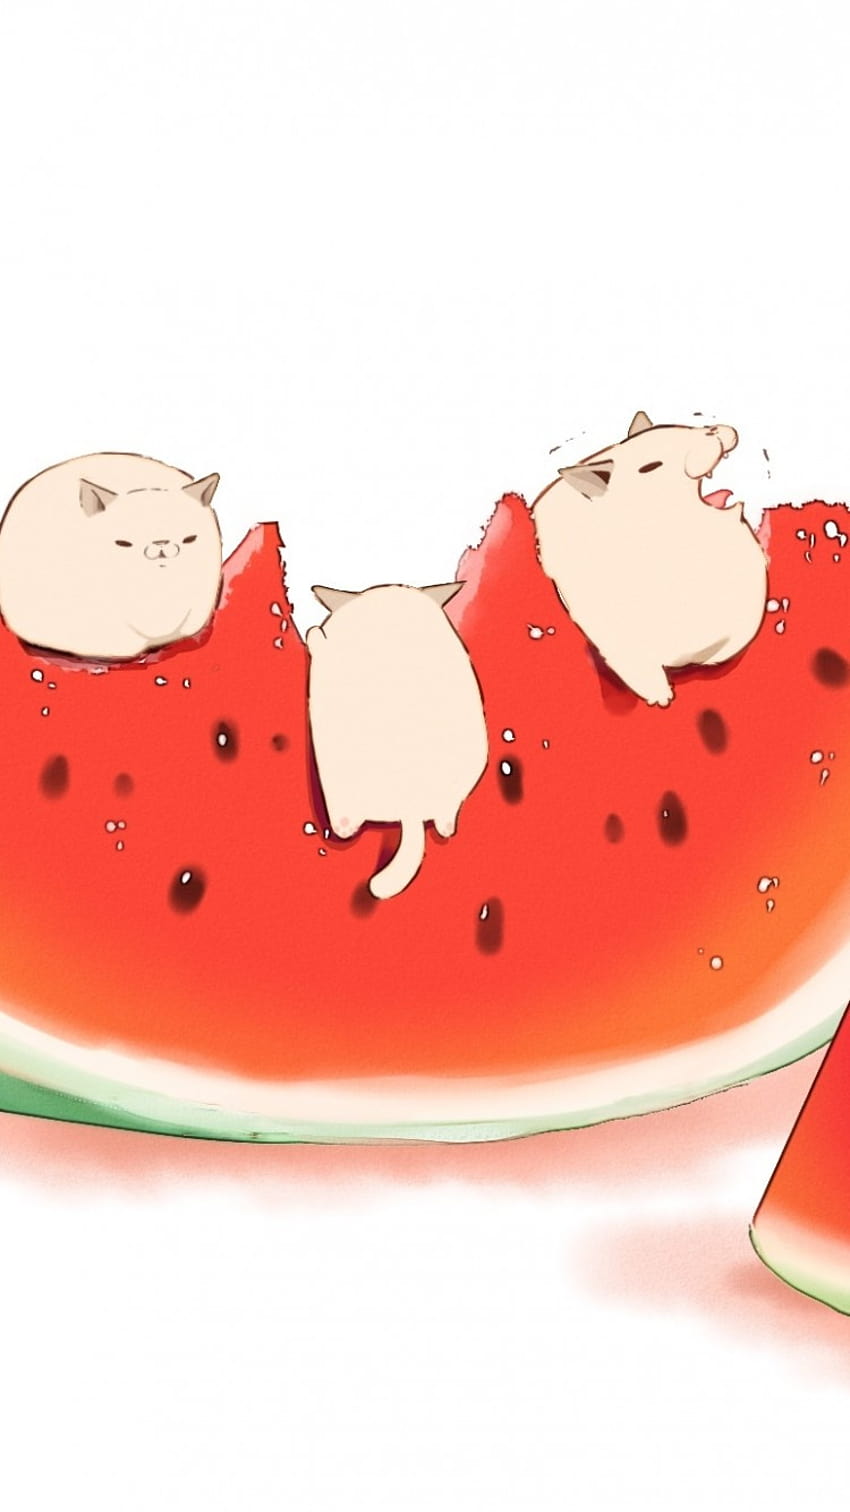 750x1334 Anime Fruits, Watermelon, Cute Creatures, Piece for iPhone 7, iPhone 6 HD phone wallpaper